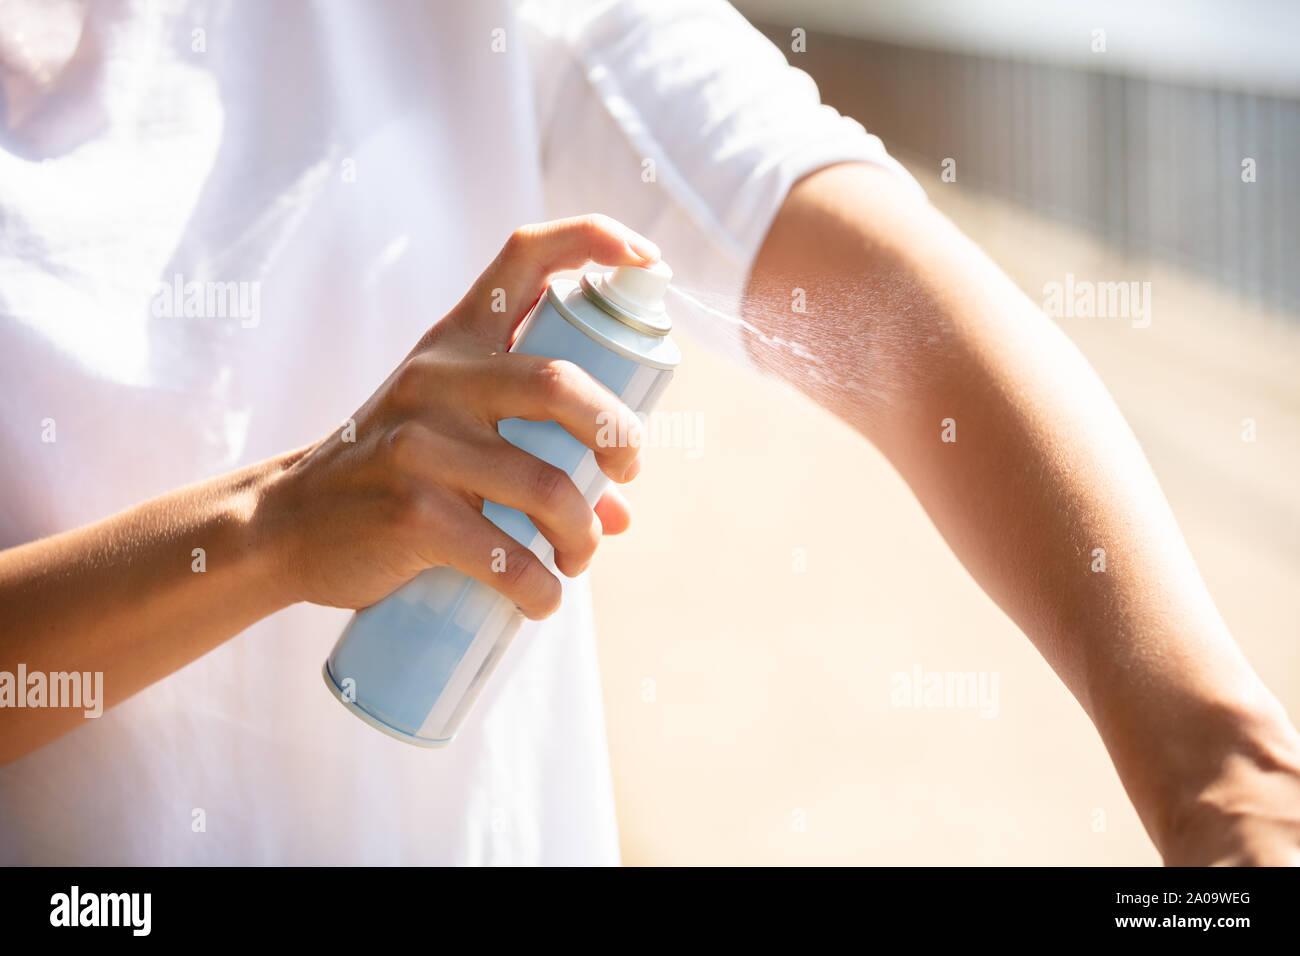 Close-up Of A Woman's Hand Spraying Anti Insect Deet Spray On Skin Outdoors Stock Photo